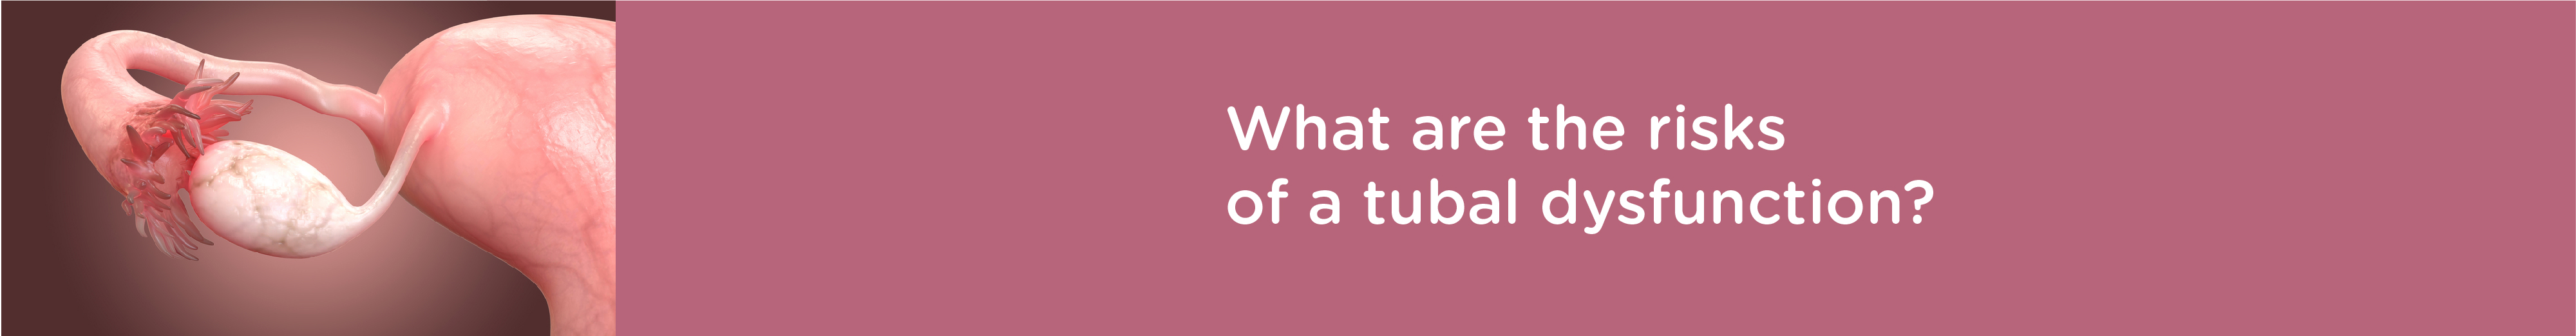 What are the Risks of a Tubal Dysfunction?